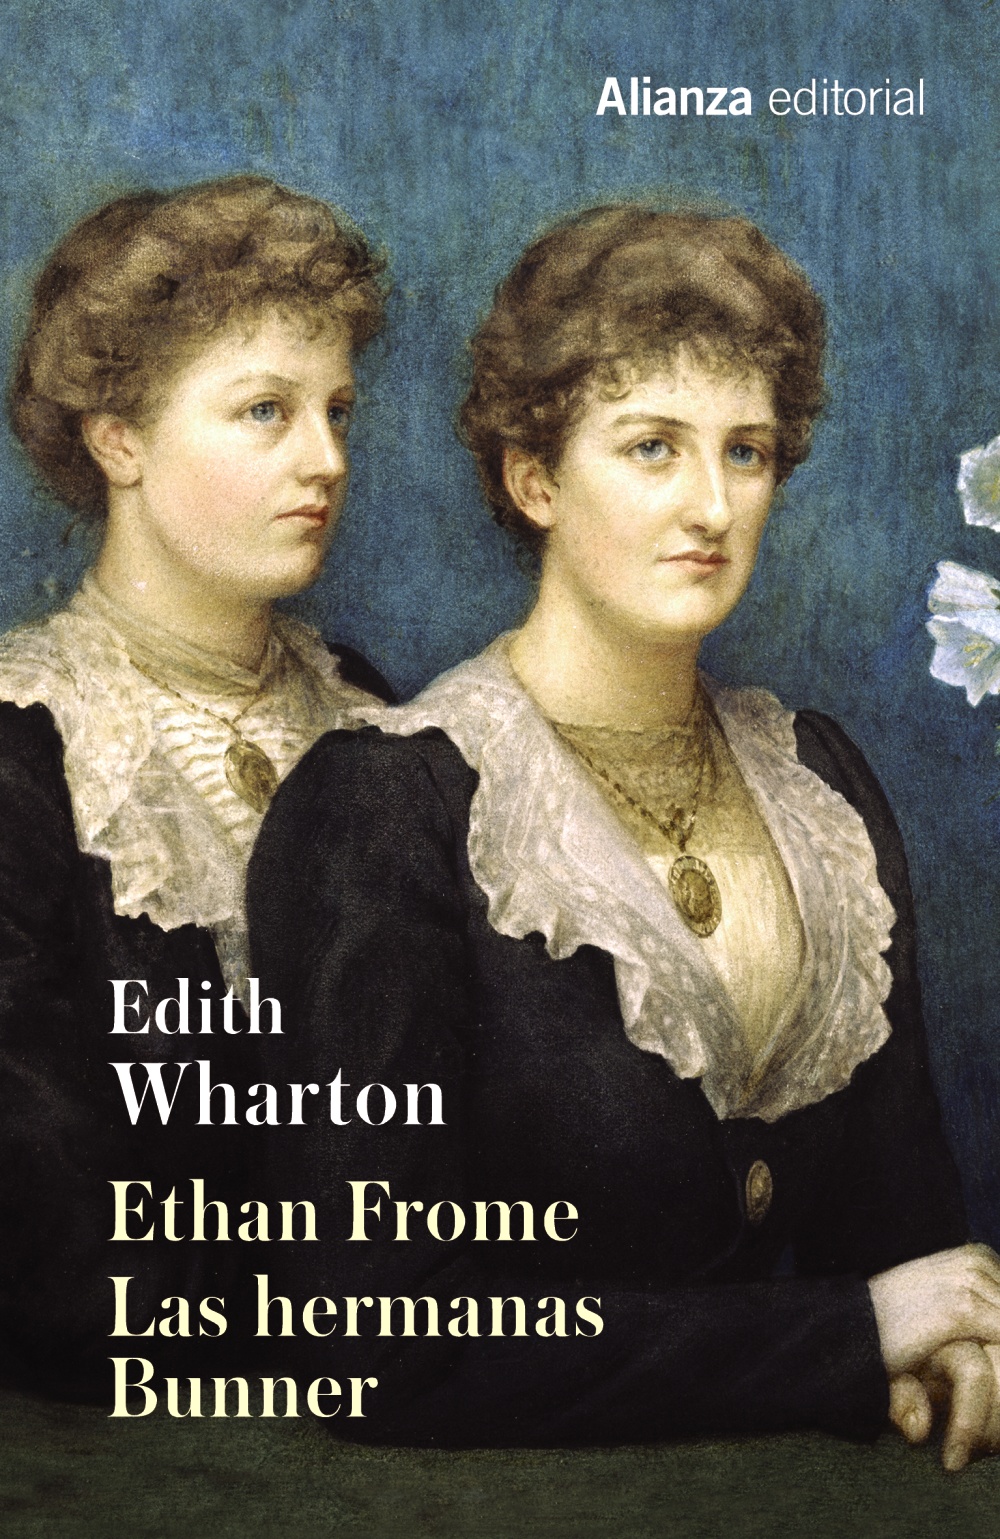 ETHAN FROME. LAS HERMANAS BUNNER. 9788491043171